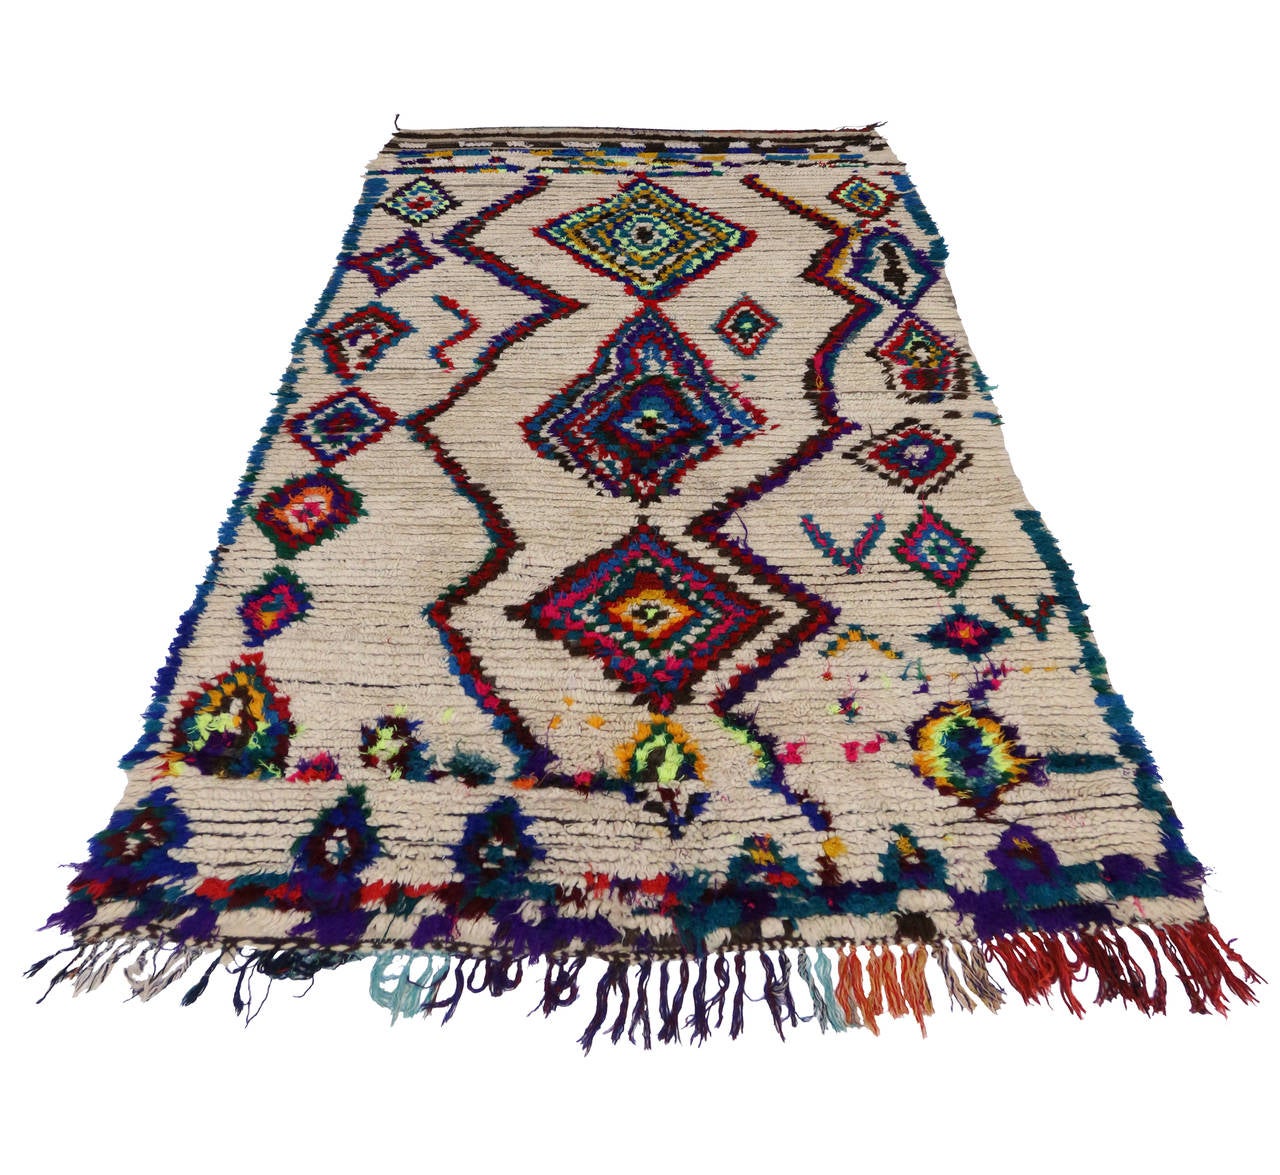 Blending the graphic appeal and folk-art warmth from the Berber Tribes of Morocco, this vintage Moroccan rug features a contemporary abstract design. Lacking a written language, Berber Tribe weavers incorporated ancestral myths into their textiles